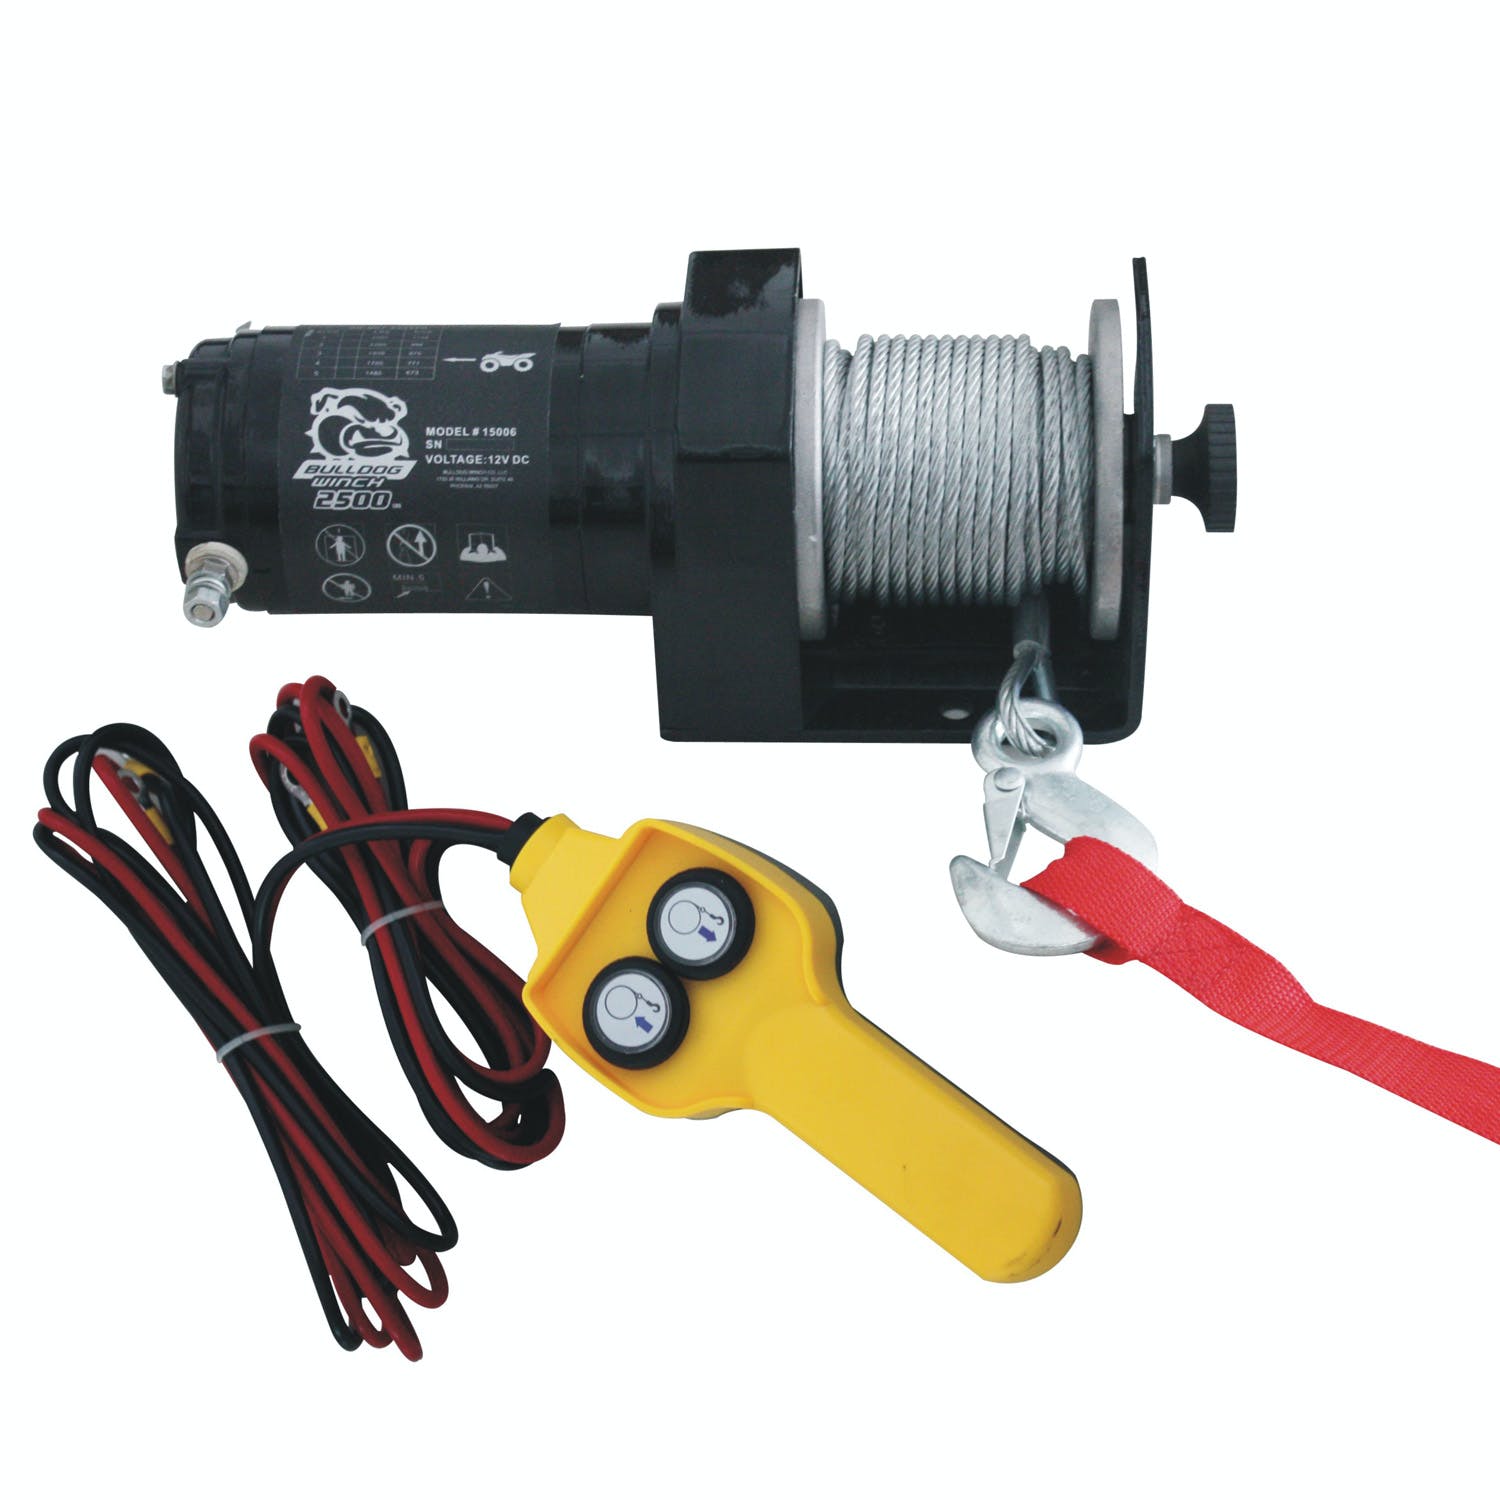 Bulldog Winch Co LLC 15008 2000lb Utility Winch, 50ft wire rope, hand held controller